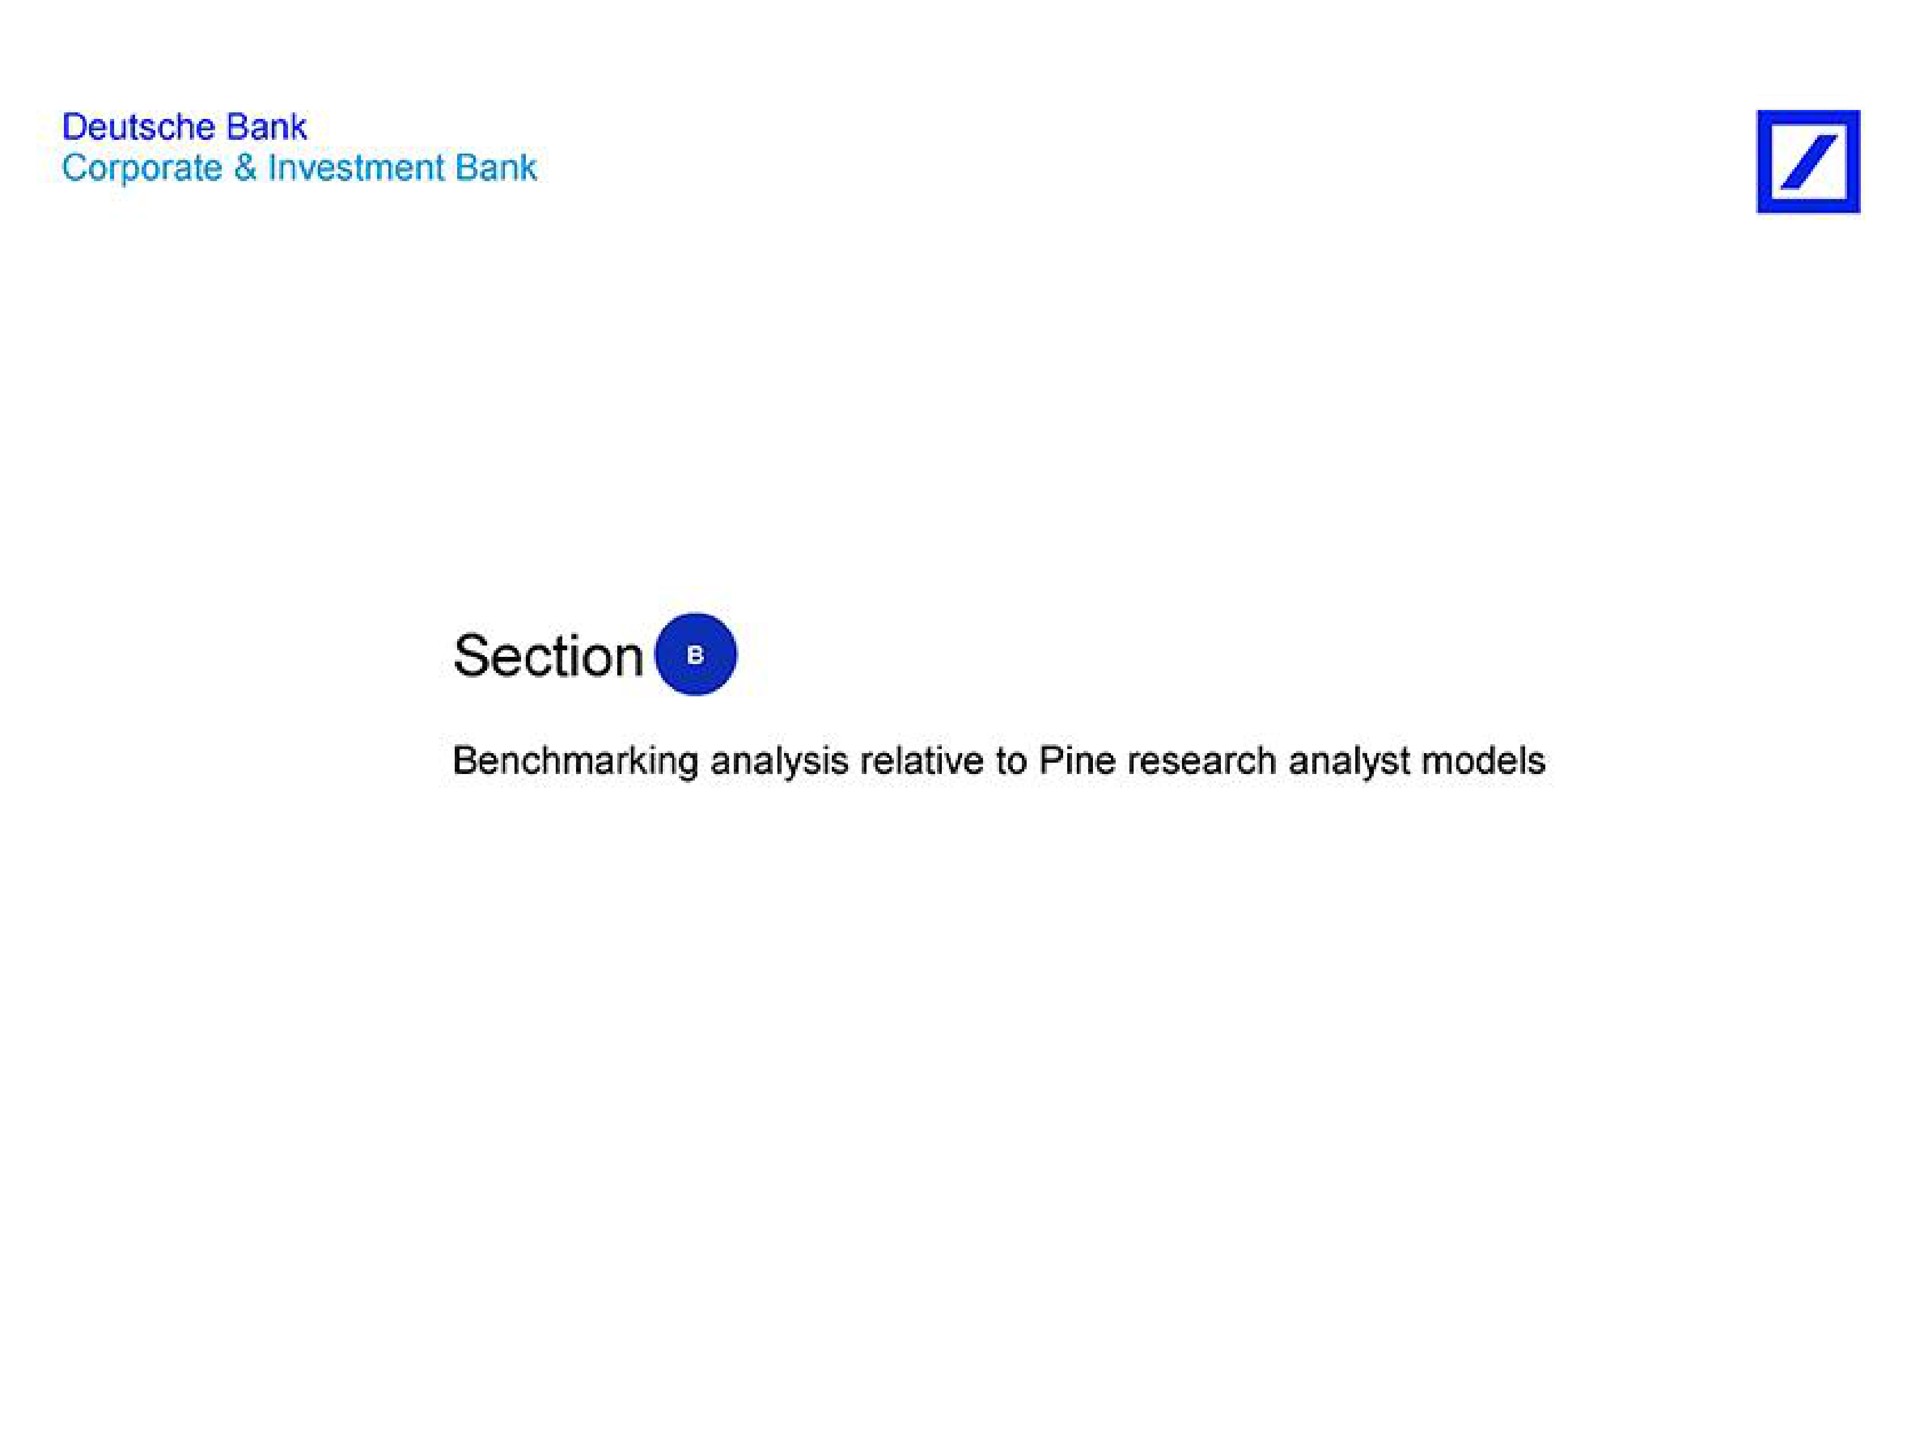 section analysis relative to pine research analyst models | Deutsche Bank